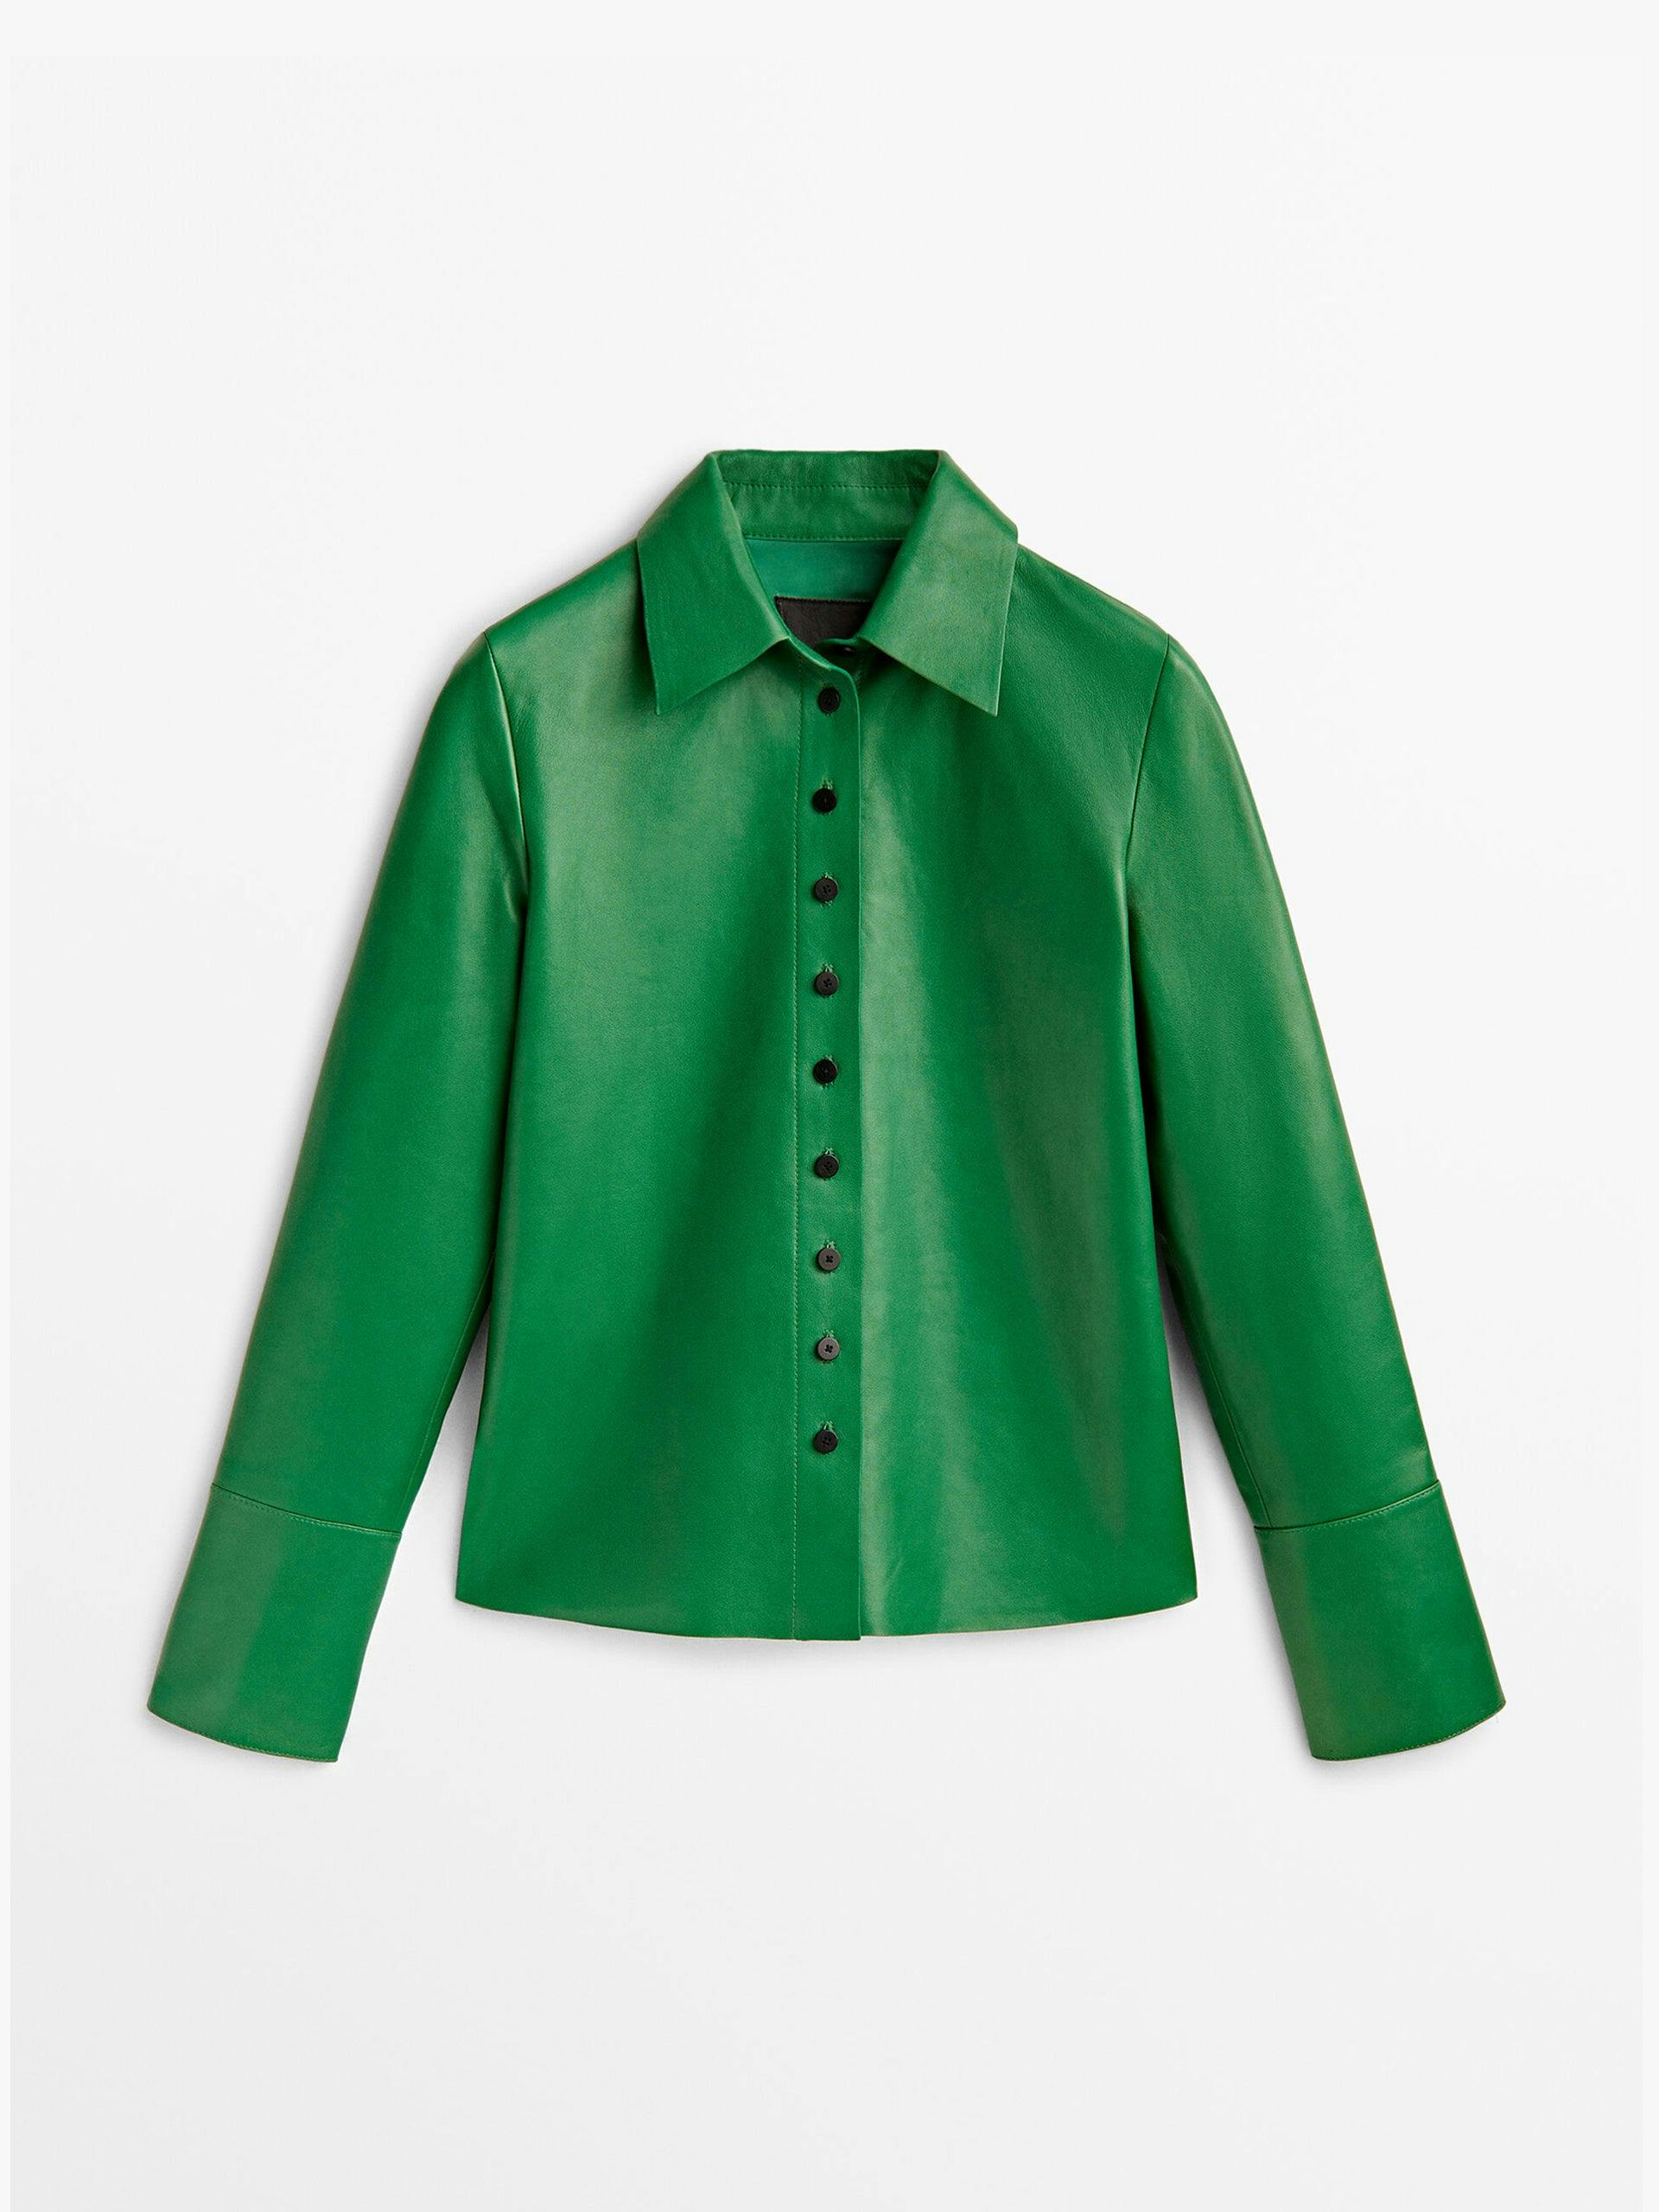 Green leather shirt